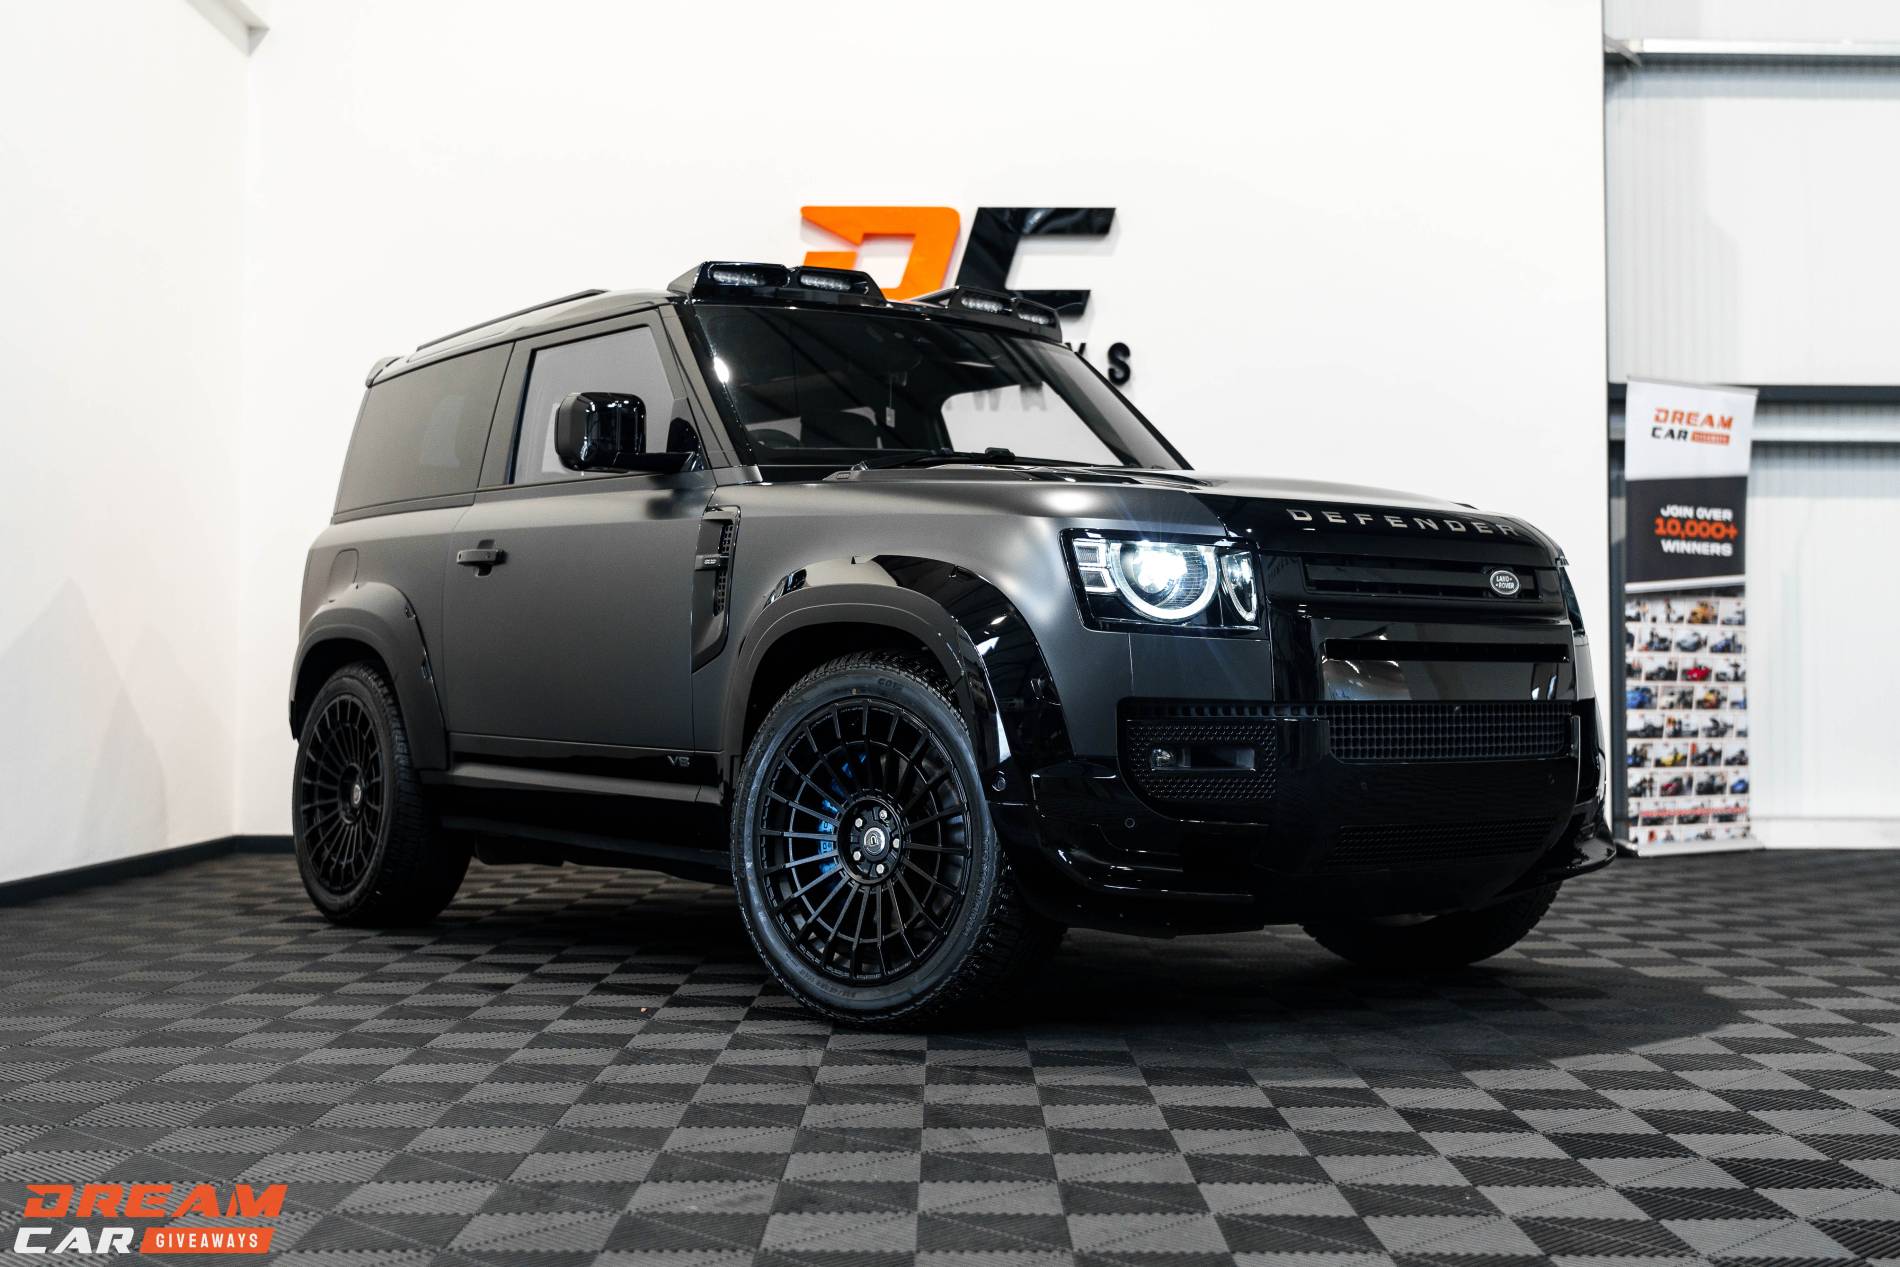 Win this 2021 Land Rover Defender 90 'Urban Widetrack' & £2,000 or £75,000